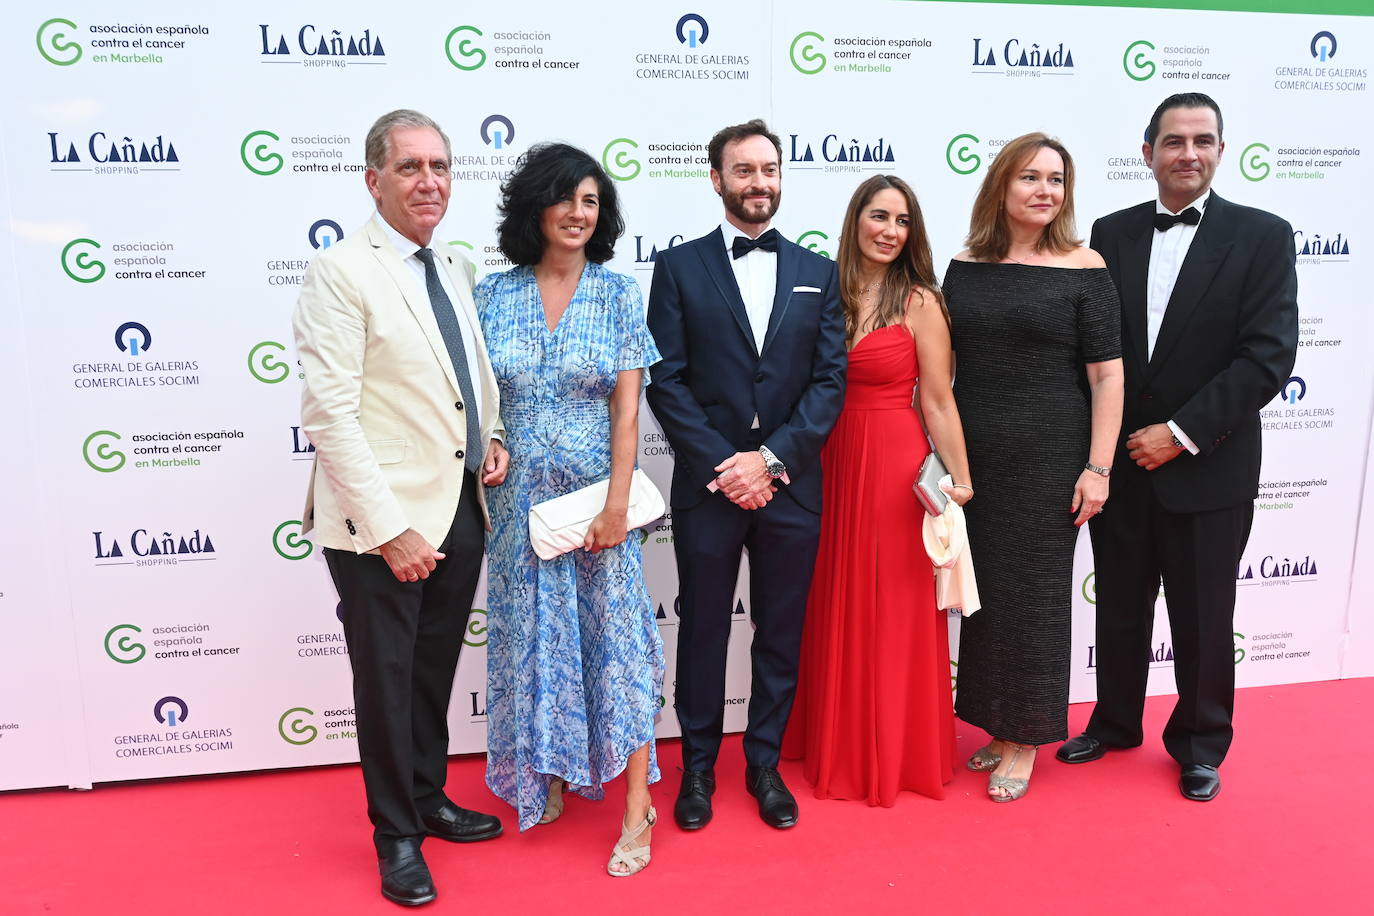 The gala dinner of the Asociación Española Contra el Cáncer de Marbella has returned in style, bringing together more than 500 people at Finca de La Concepción to support the work of this group that cares for patients suffering from this disease and their families